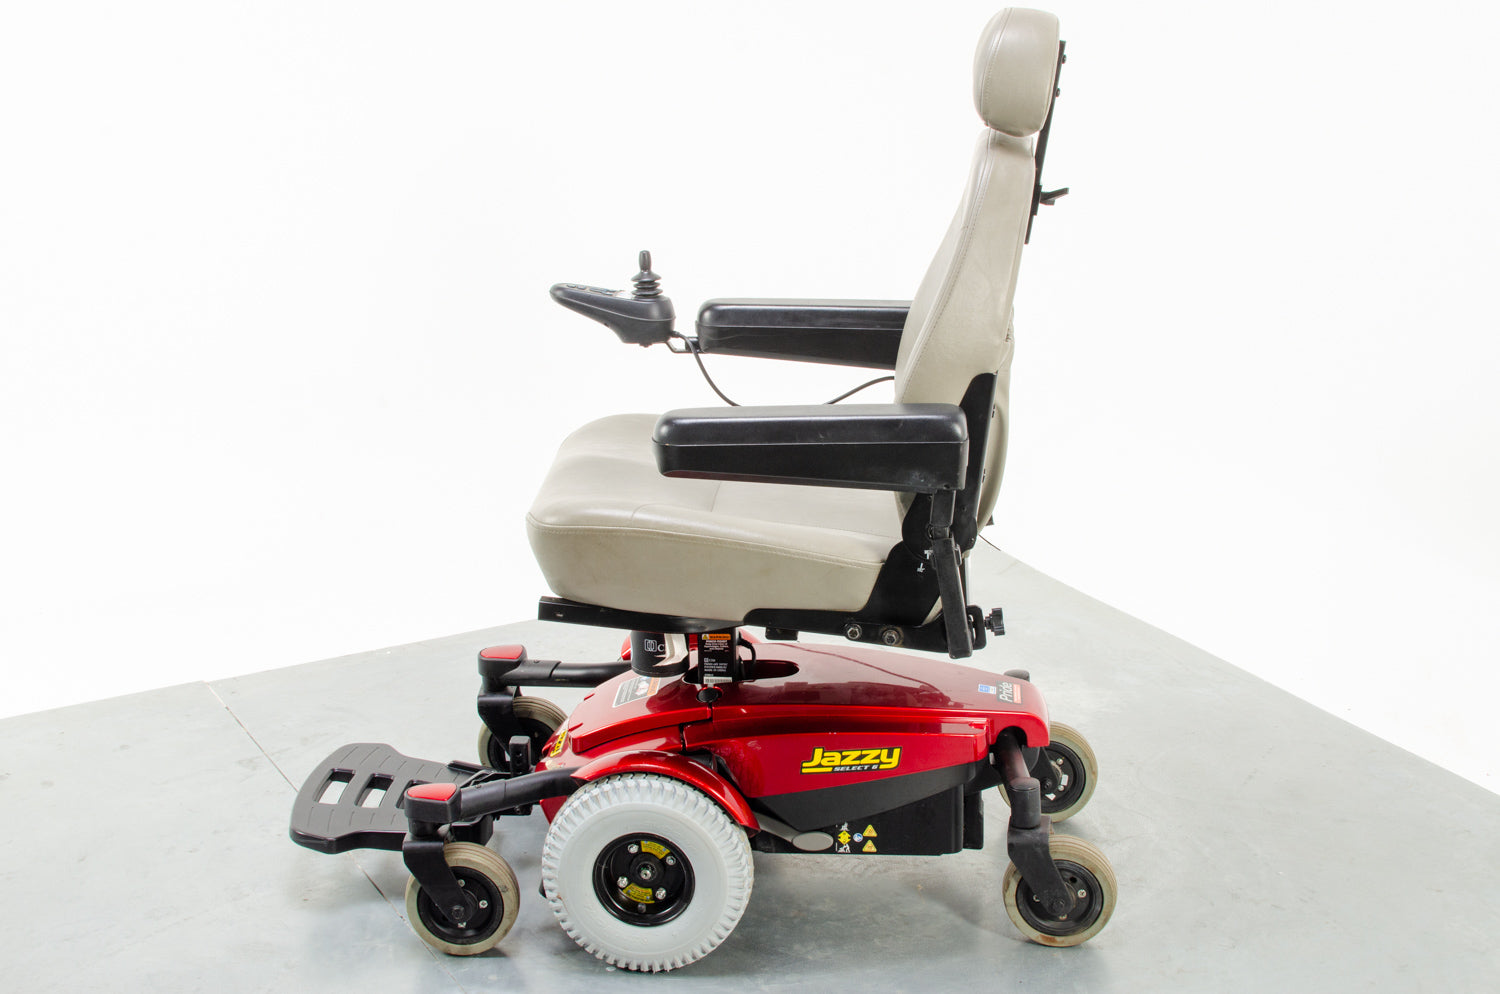 Pride Jazzy Select 6 Used Electric Wheelchair Powerchair Indoor Outdoor MWD